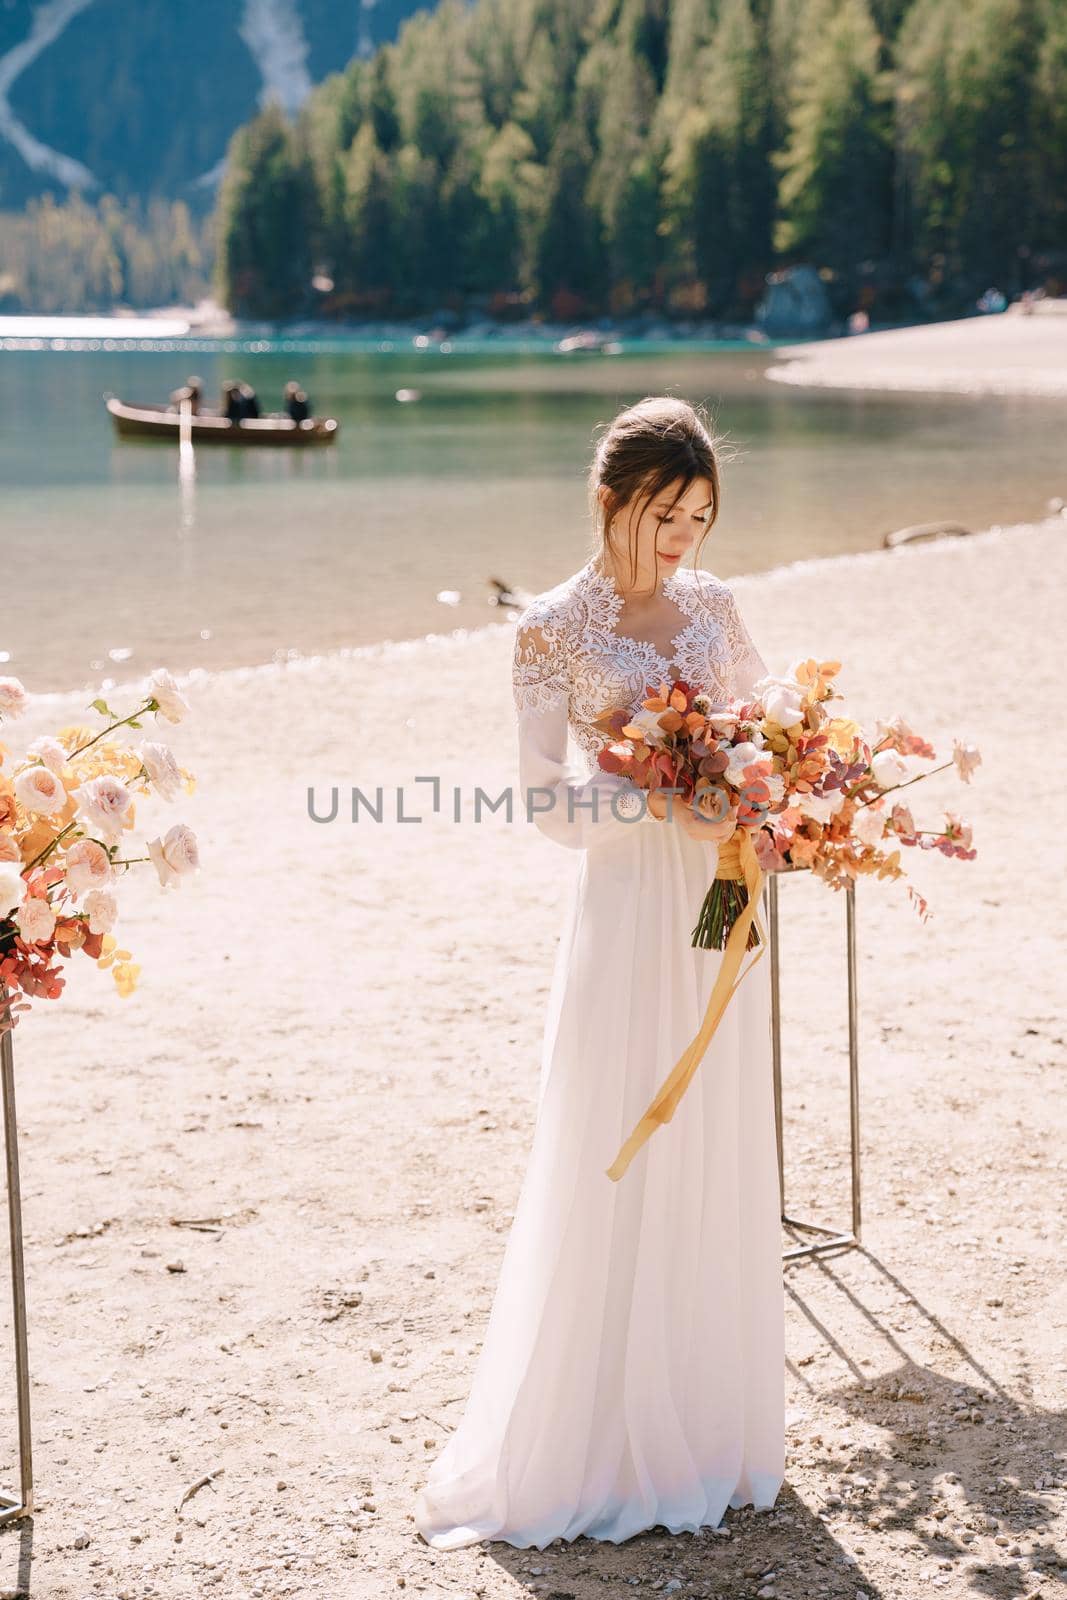 Beautiful bride in a white dress with sleeves and lace, with a yellow autumn bouquet against backdrop of arch for ceremony, at Lago di Braies in Italy. Destination wedding in Europe, at Braies lake.